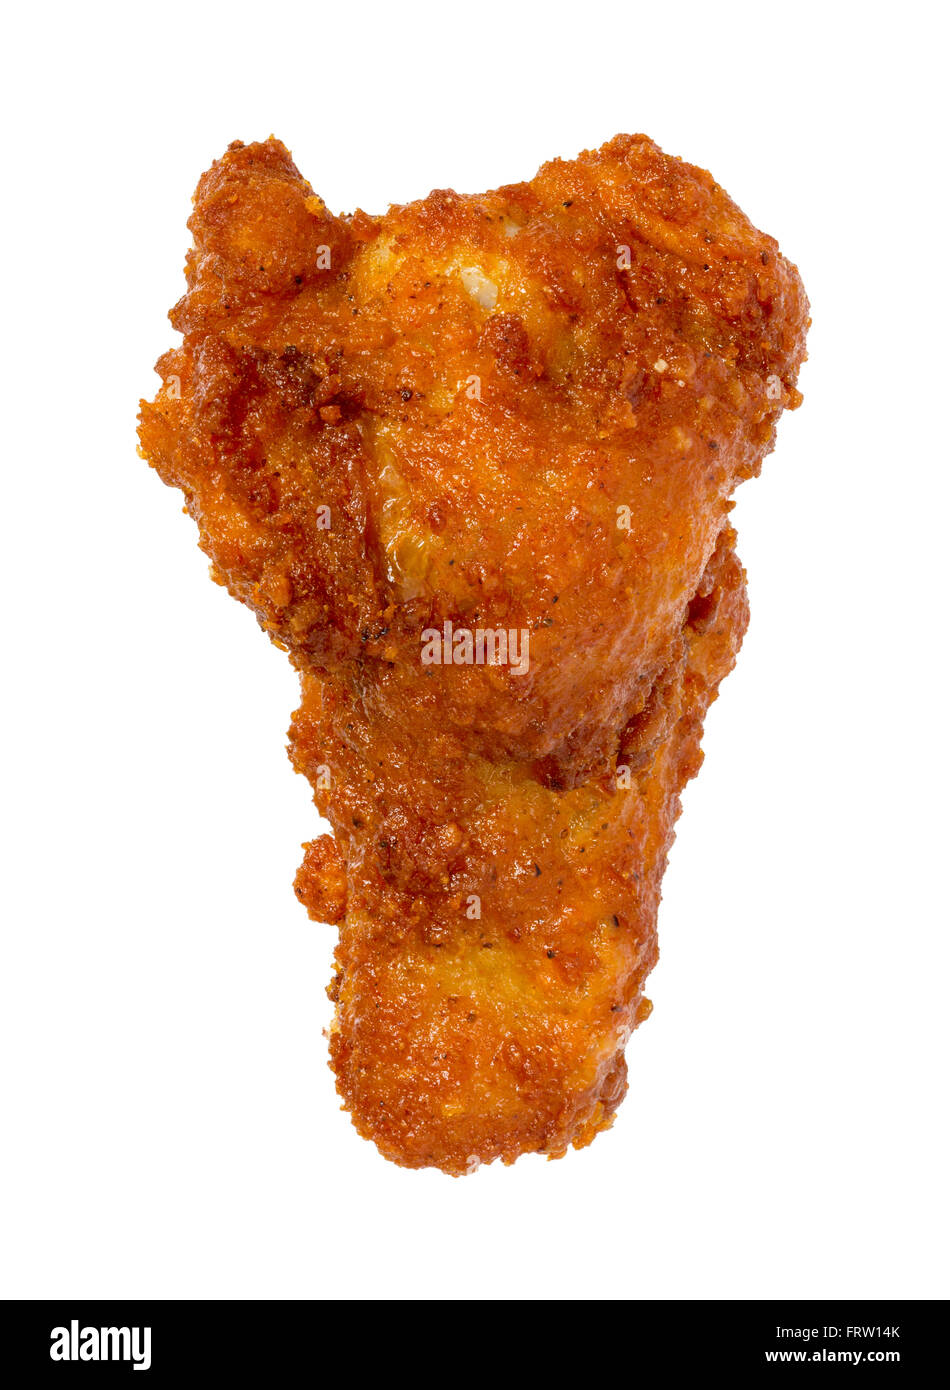 Buffalo Chicken Wing. This appetizer has become a popular bar food. The image is a cut out, isolated on a white background. Stock Photo